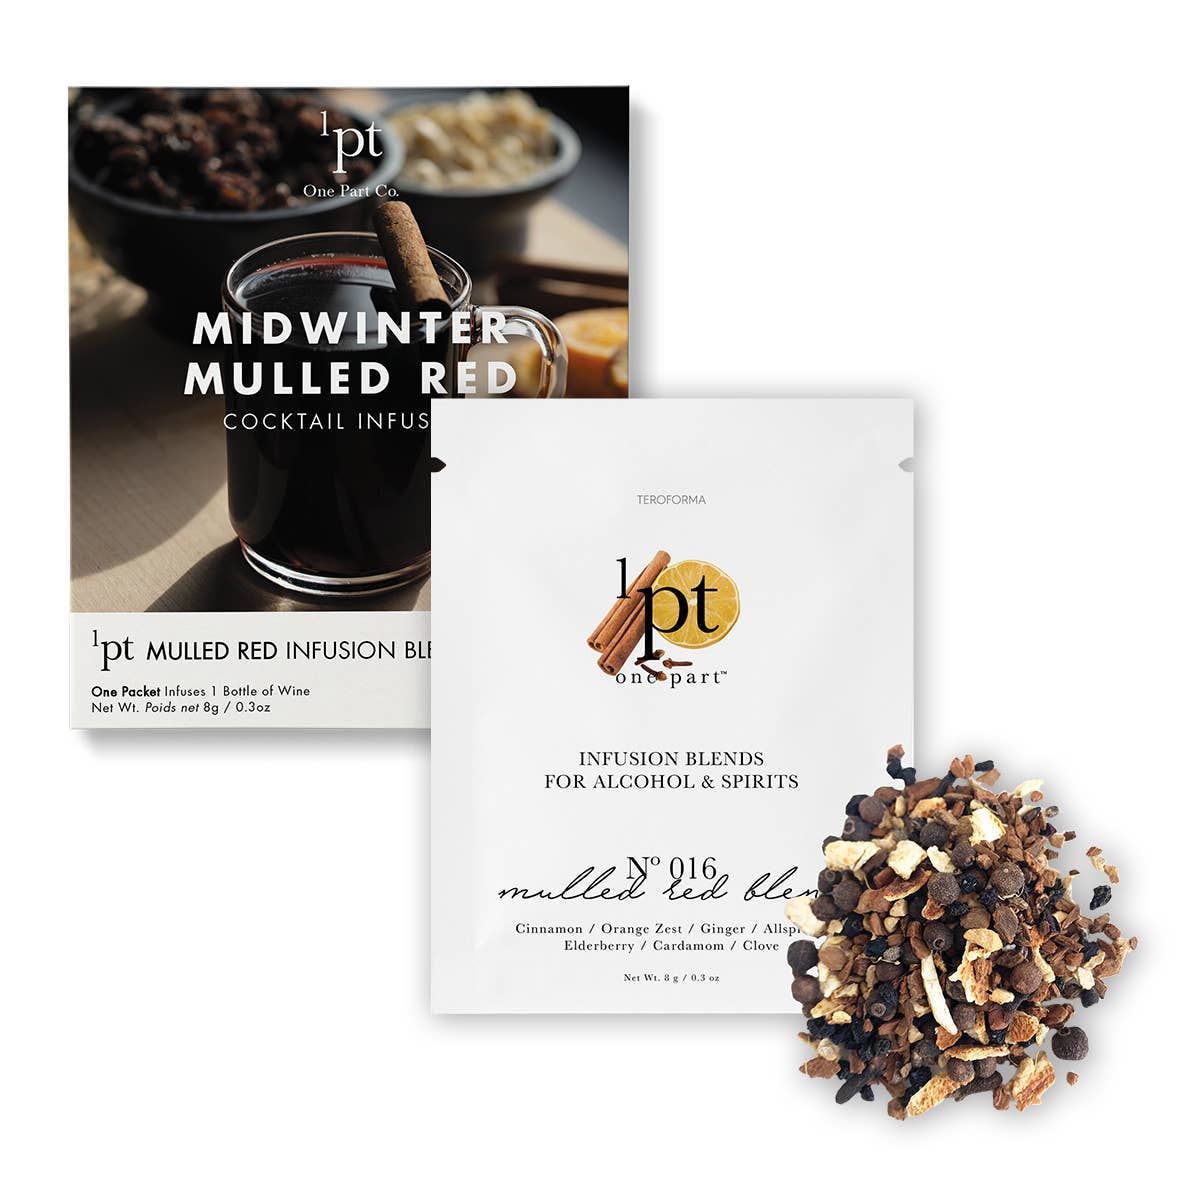 1pt Midwinter Mulled Red Cocktail Pack